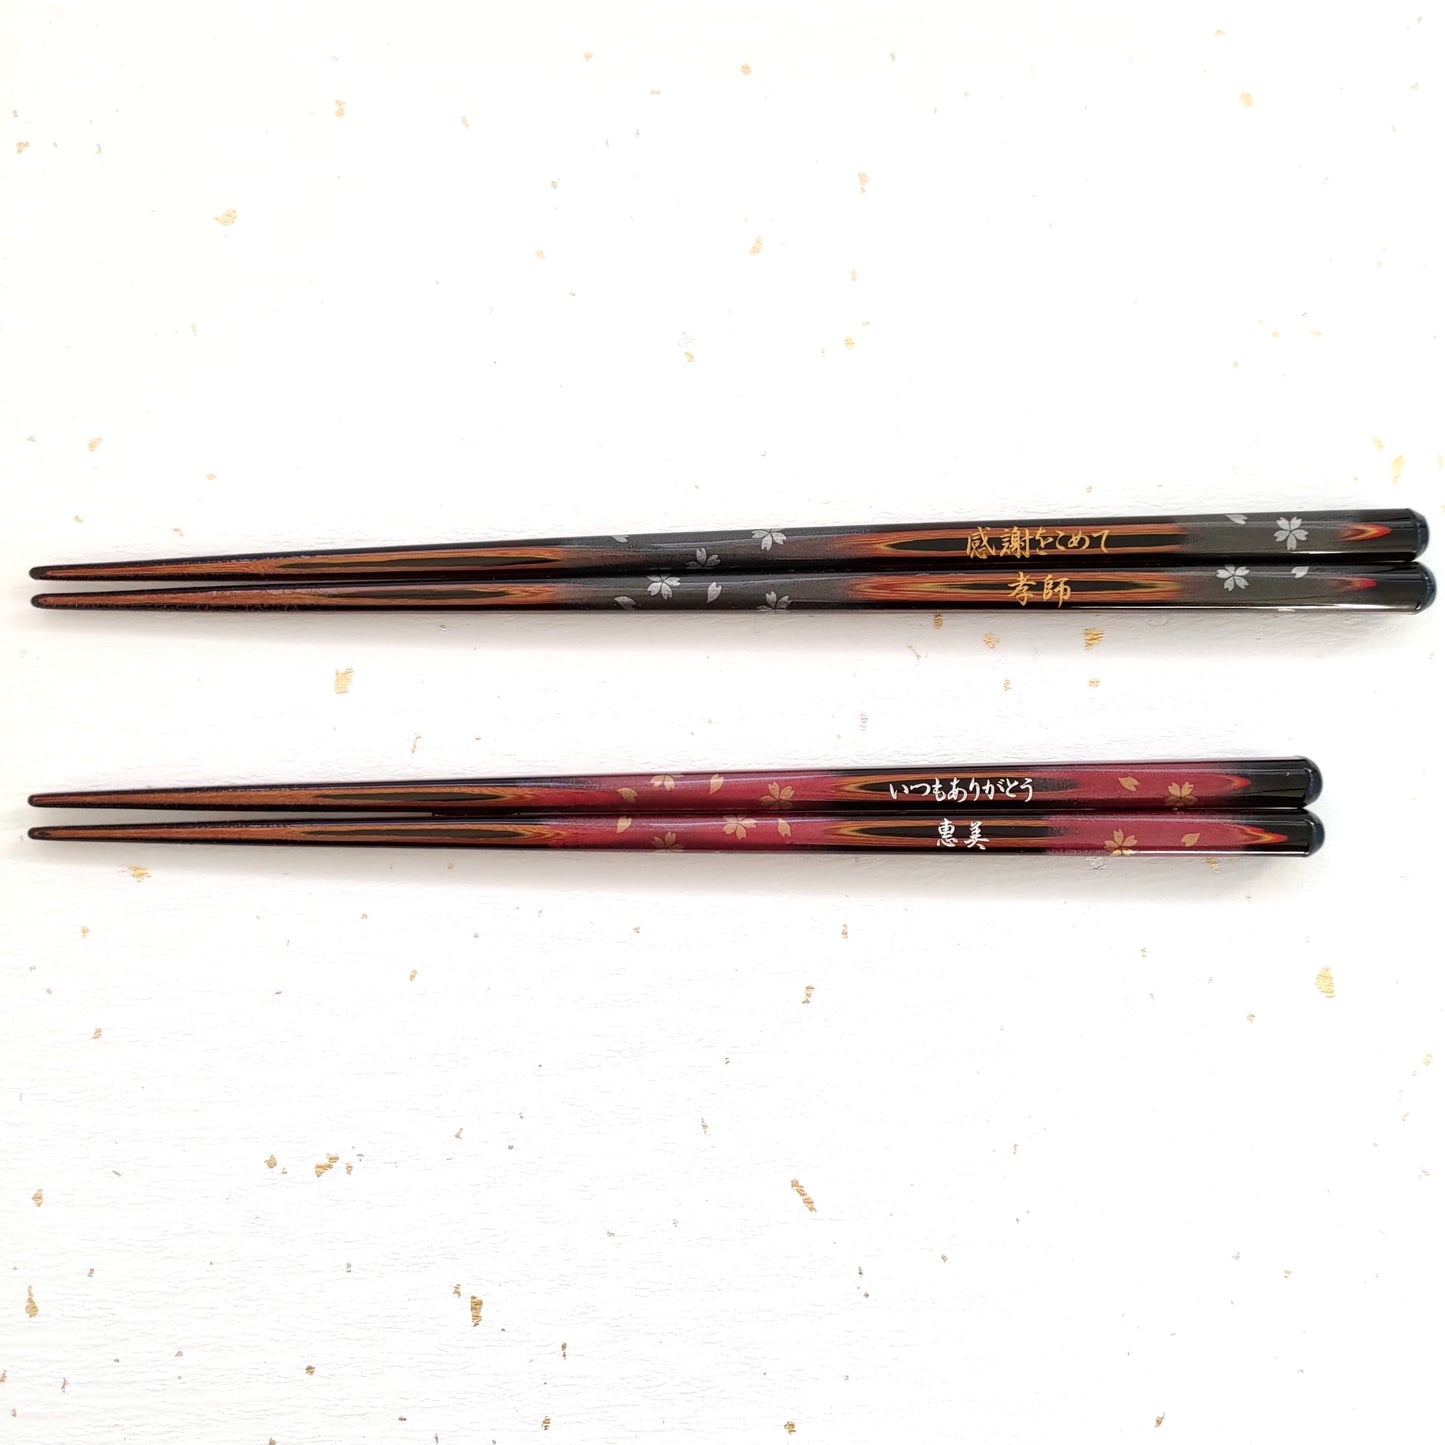 Immortal cherry blossoms Japanese chopsticks black red - DOUBLE PAIR WITH ENGRAVED WOODEN BOX SET